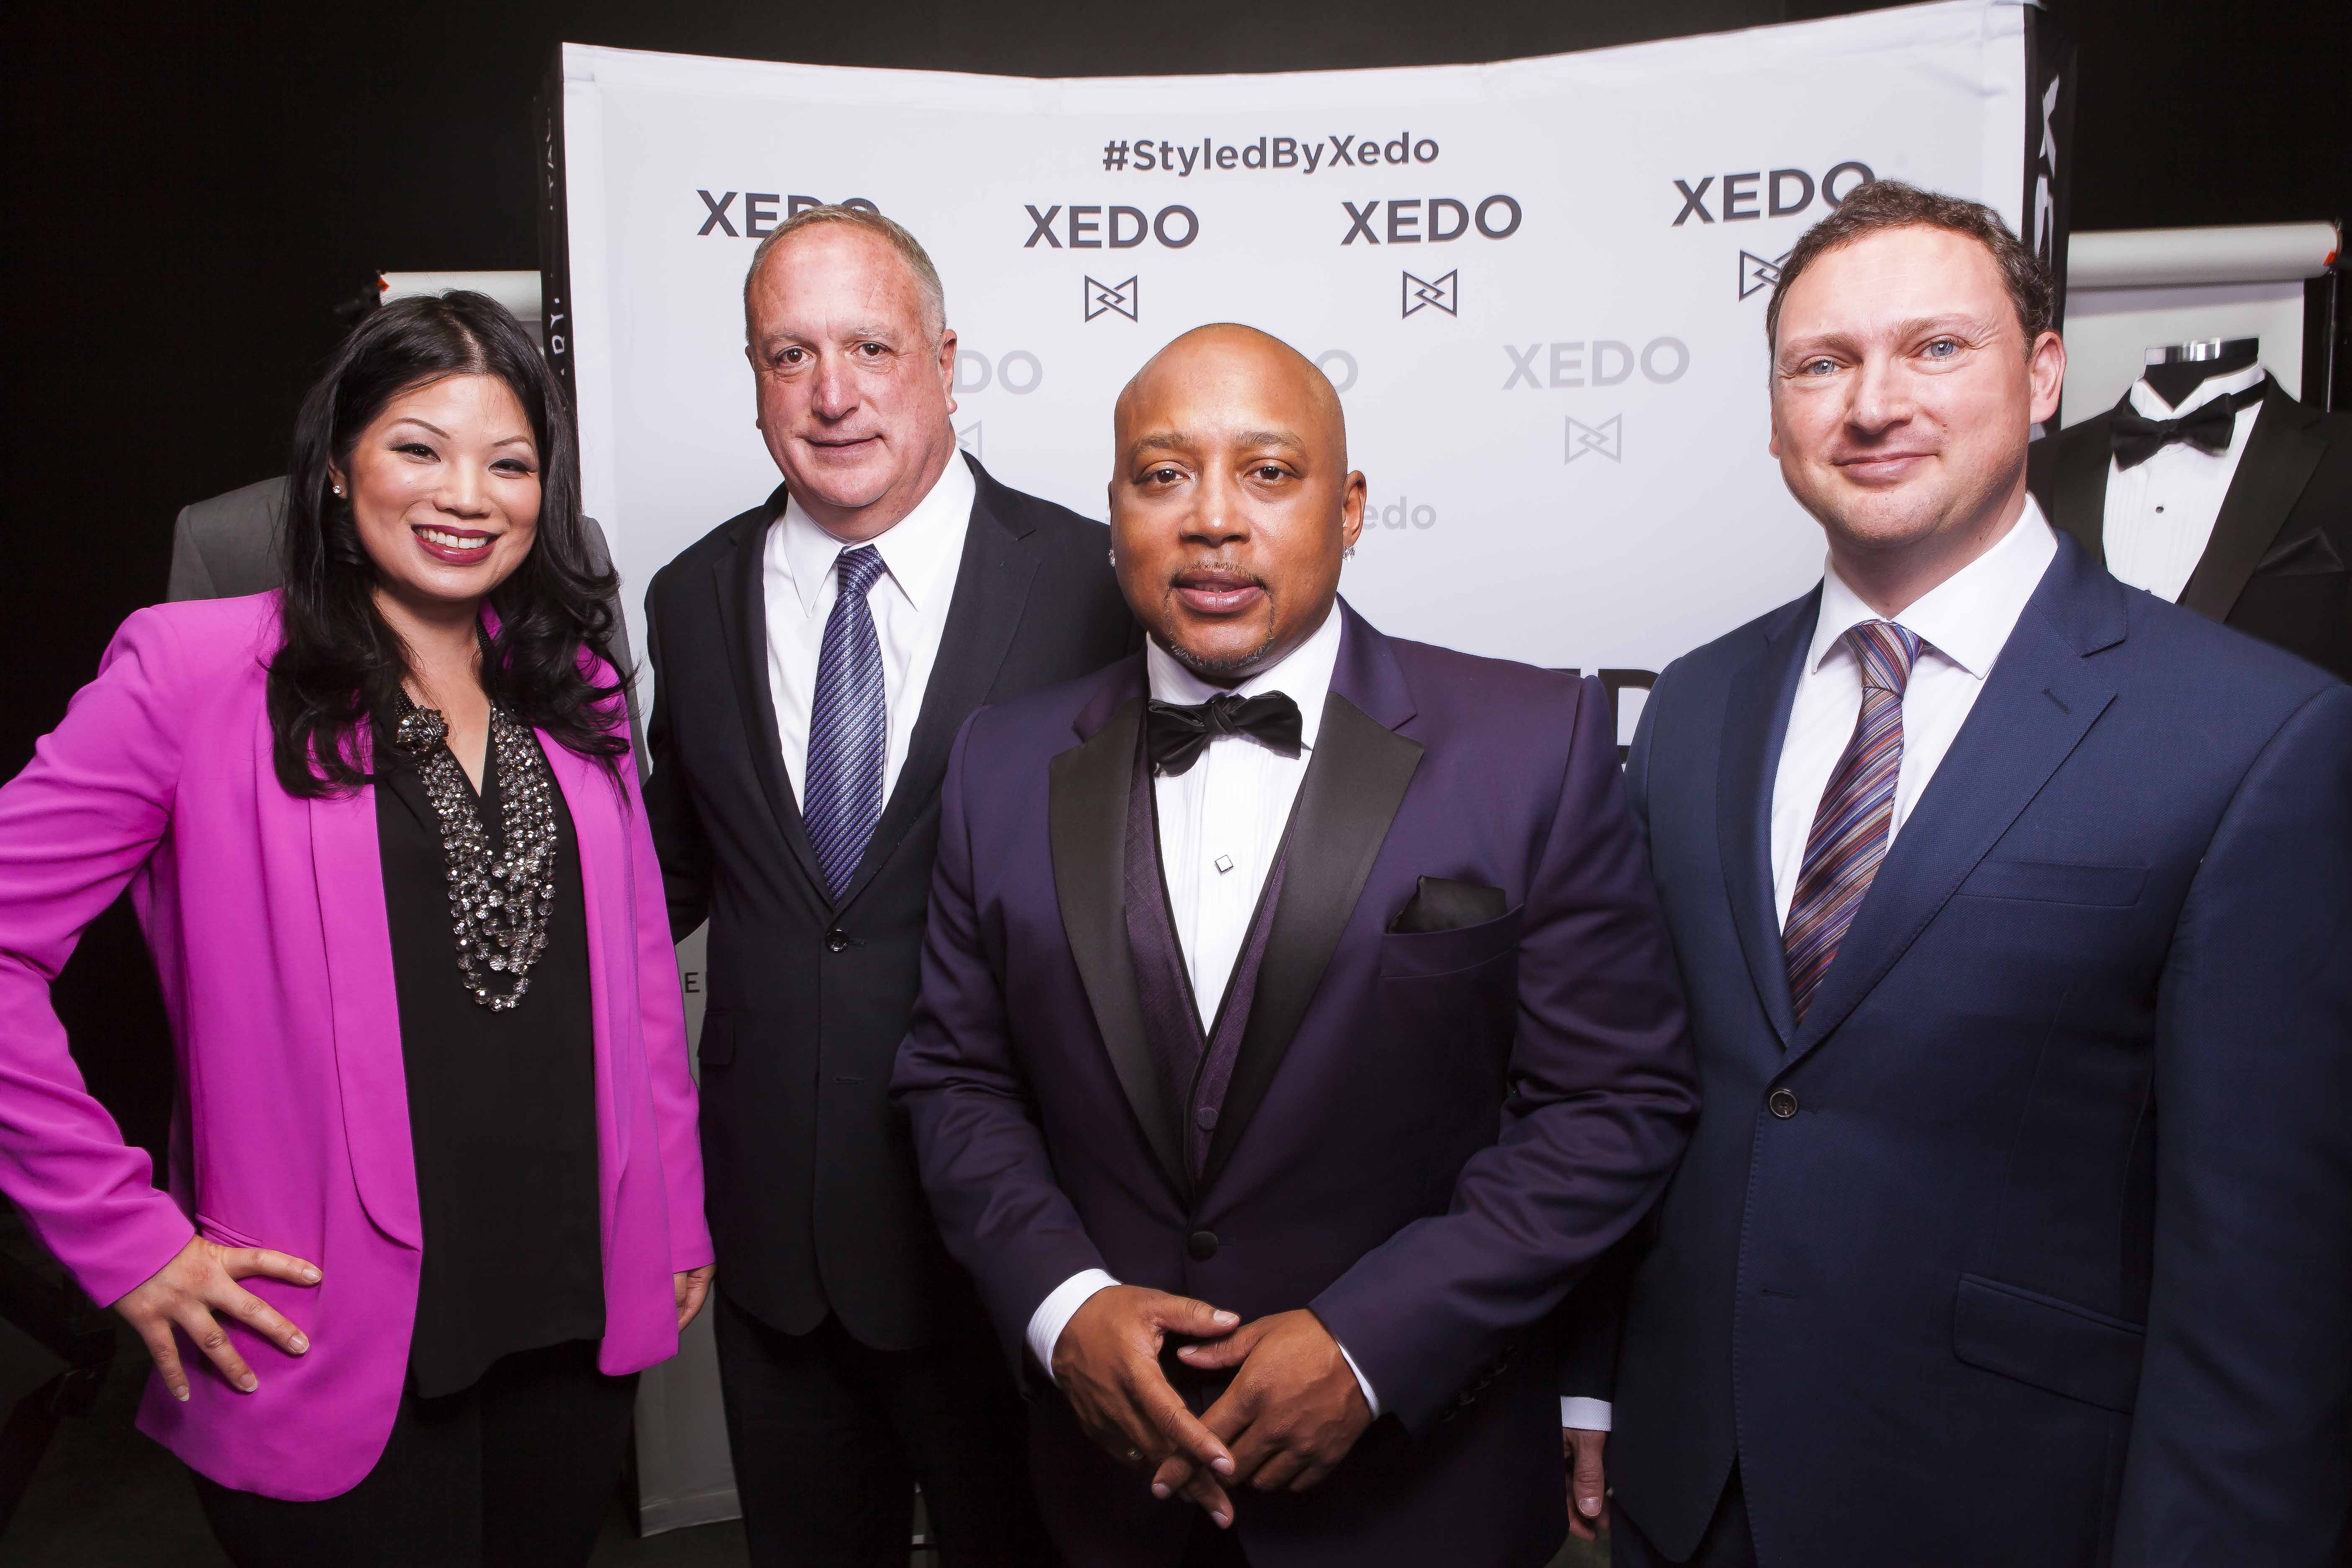 SUIT UP WITH DAYMOND JOHN